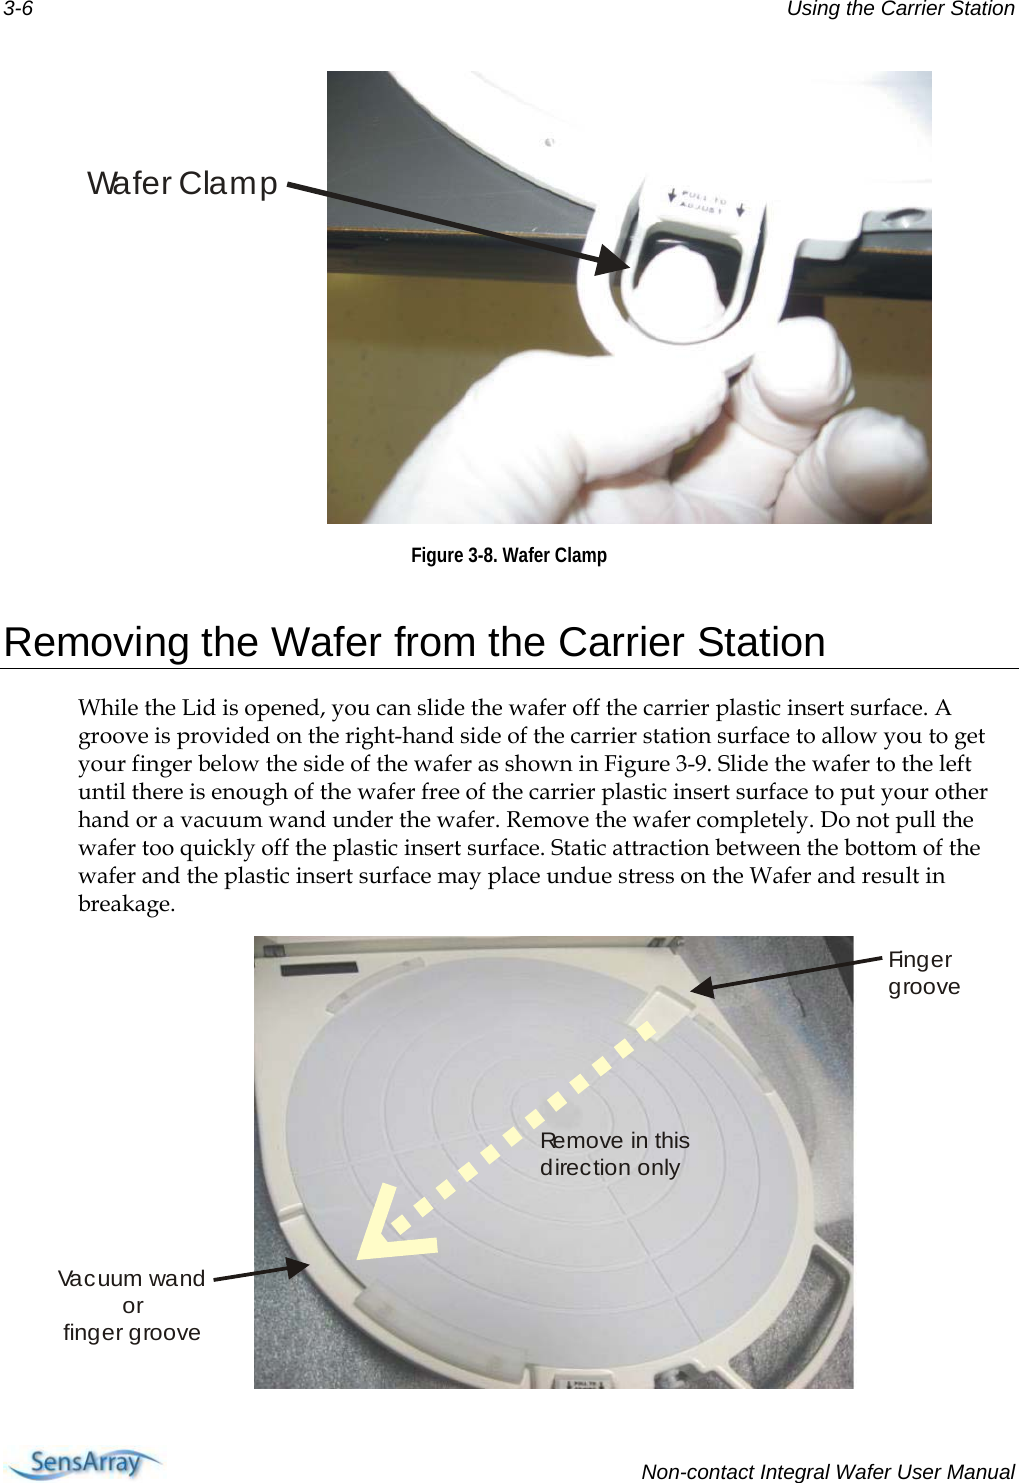 3-6  Using the Carrier Station Wa f e r C la m p Figure 3-8. Wafer Clamp  Removing the Wafer from the Carrier Station While the Lid is opened, you can slide the wafer off the carrier plastic insert surface. A groove is provided on the right-hand side of the carrier station surface to allow you to get your finger below the side of the wafer as shown in Figure 3-9. Slide the wafer to the left until there is enough of the wafer free of the carrier plastic insert surface to put your other hand or a vacuum wand under the wafer. Remove the wafer completely. Do not pull the wafer too quickly off the plastic insert surface. Static attraction between the bottom of the wafer and the plastic insert surface may place undue stress on the Wafer and result in breakage. Fi n g e rgrooveVa c uum  wa n dorfinger grooveRe m o v e  i n  t h i s direction only   Non-contact Integral Wafer User Manual 